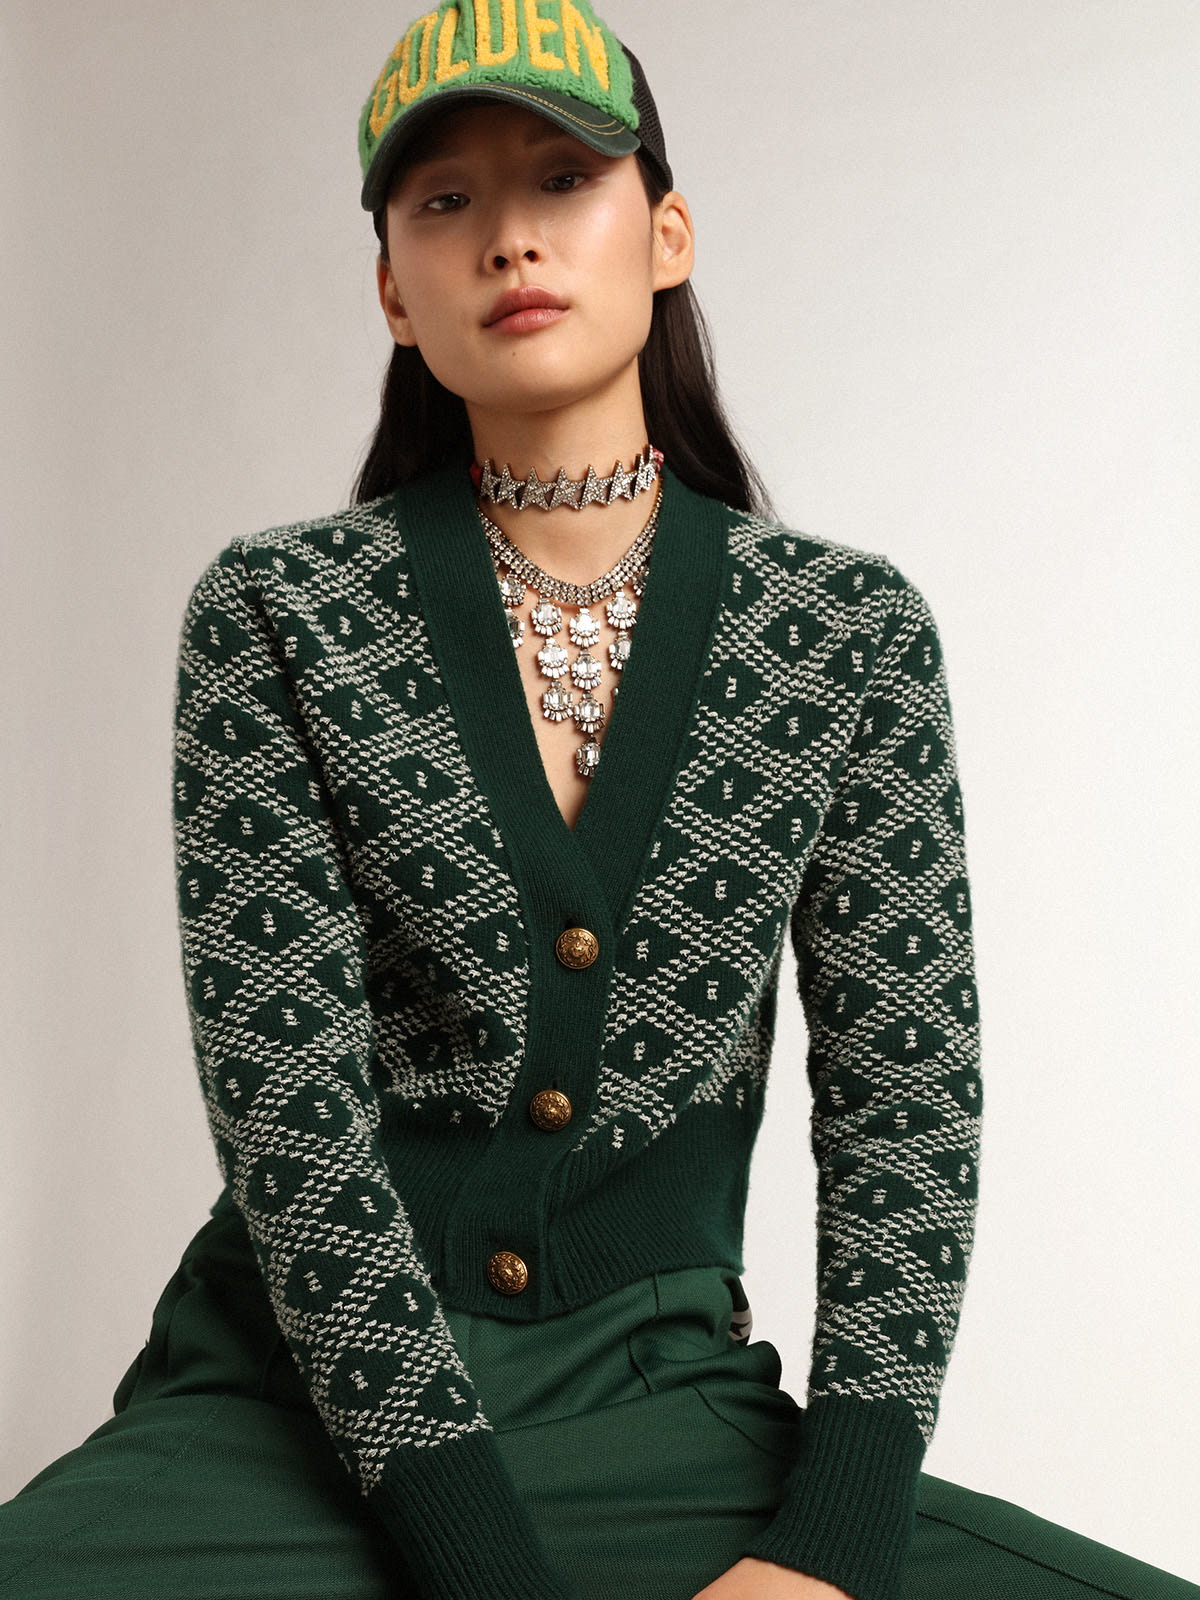 Golden Goose - Journey Collection cropped cardigan with green and white jacquard diamond pattern in 